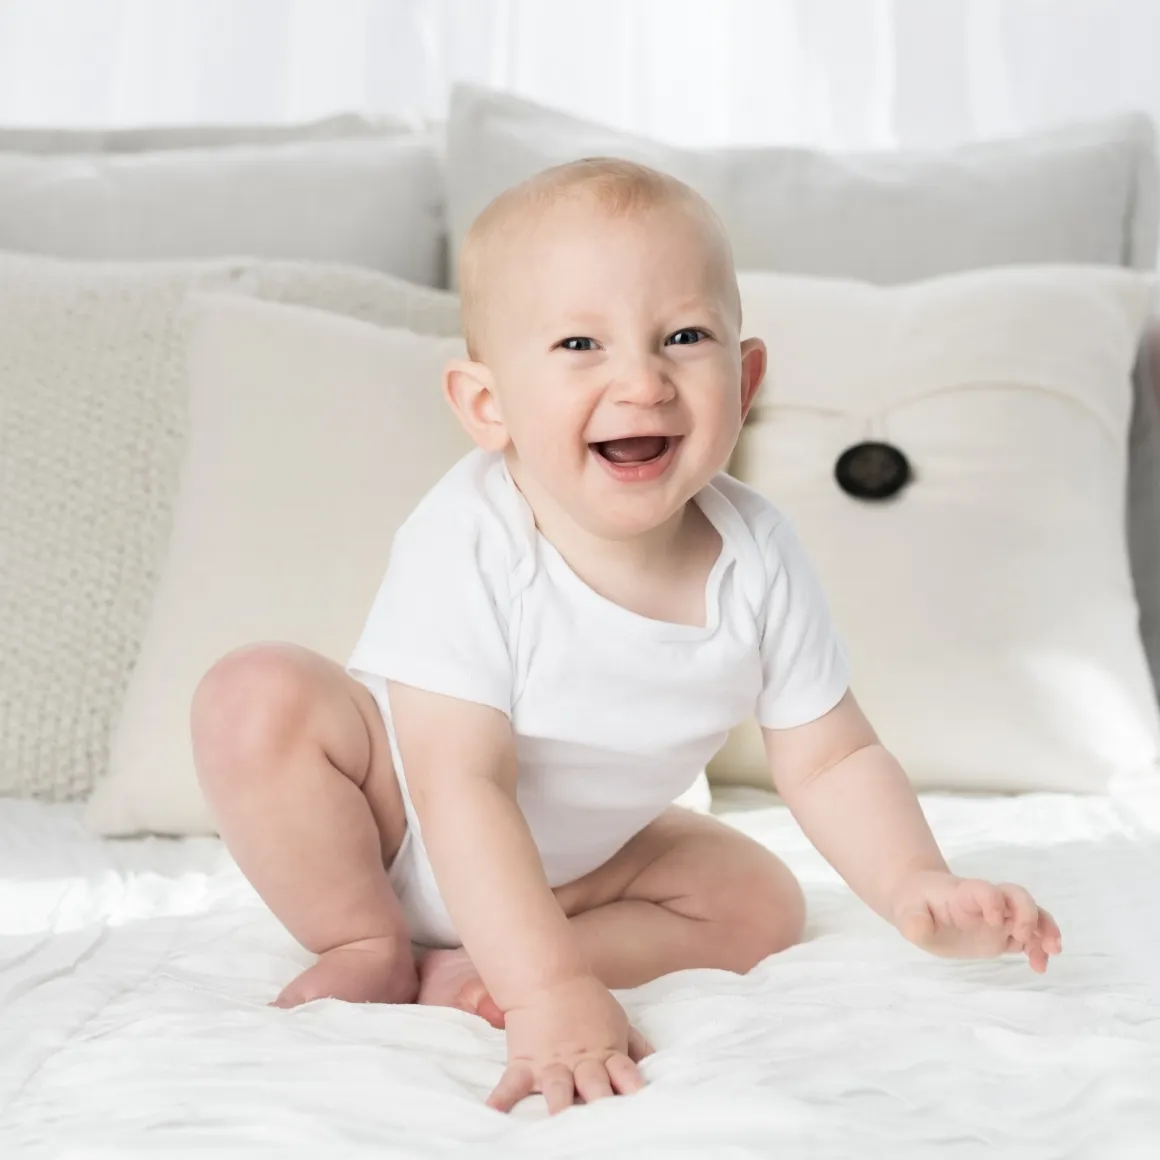  smiling baby sitting on a couch